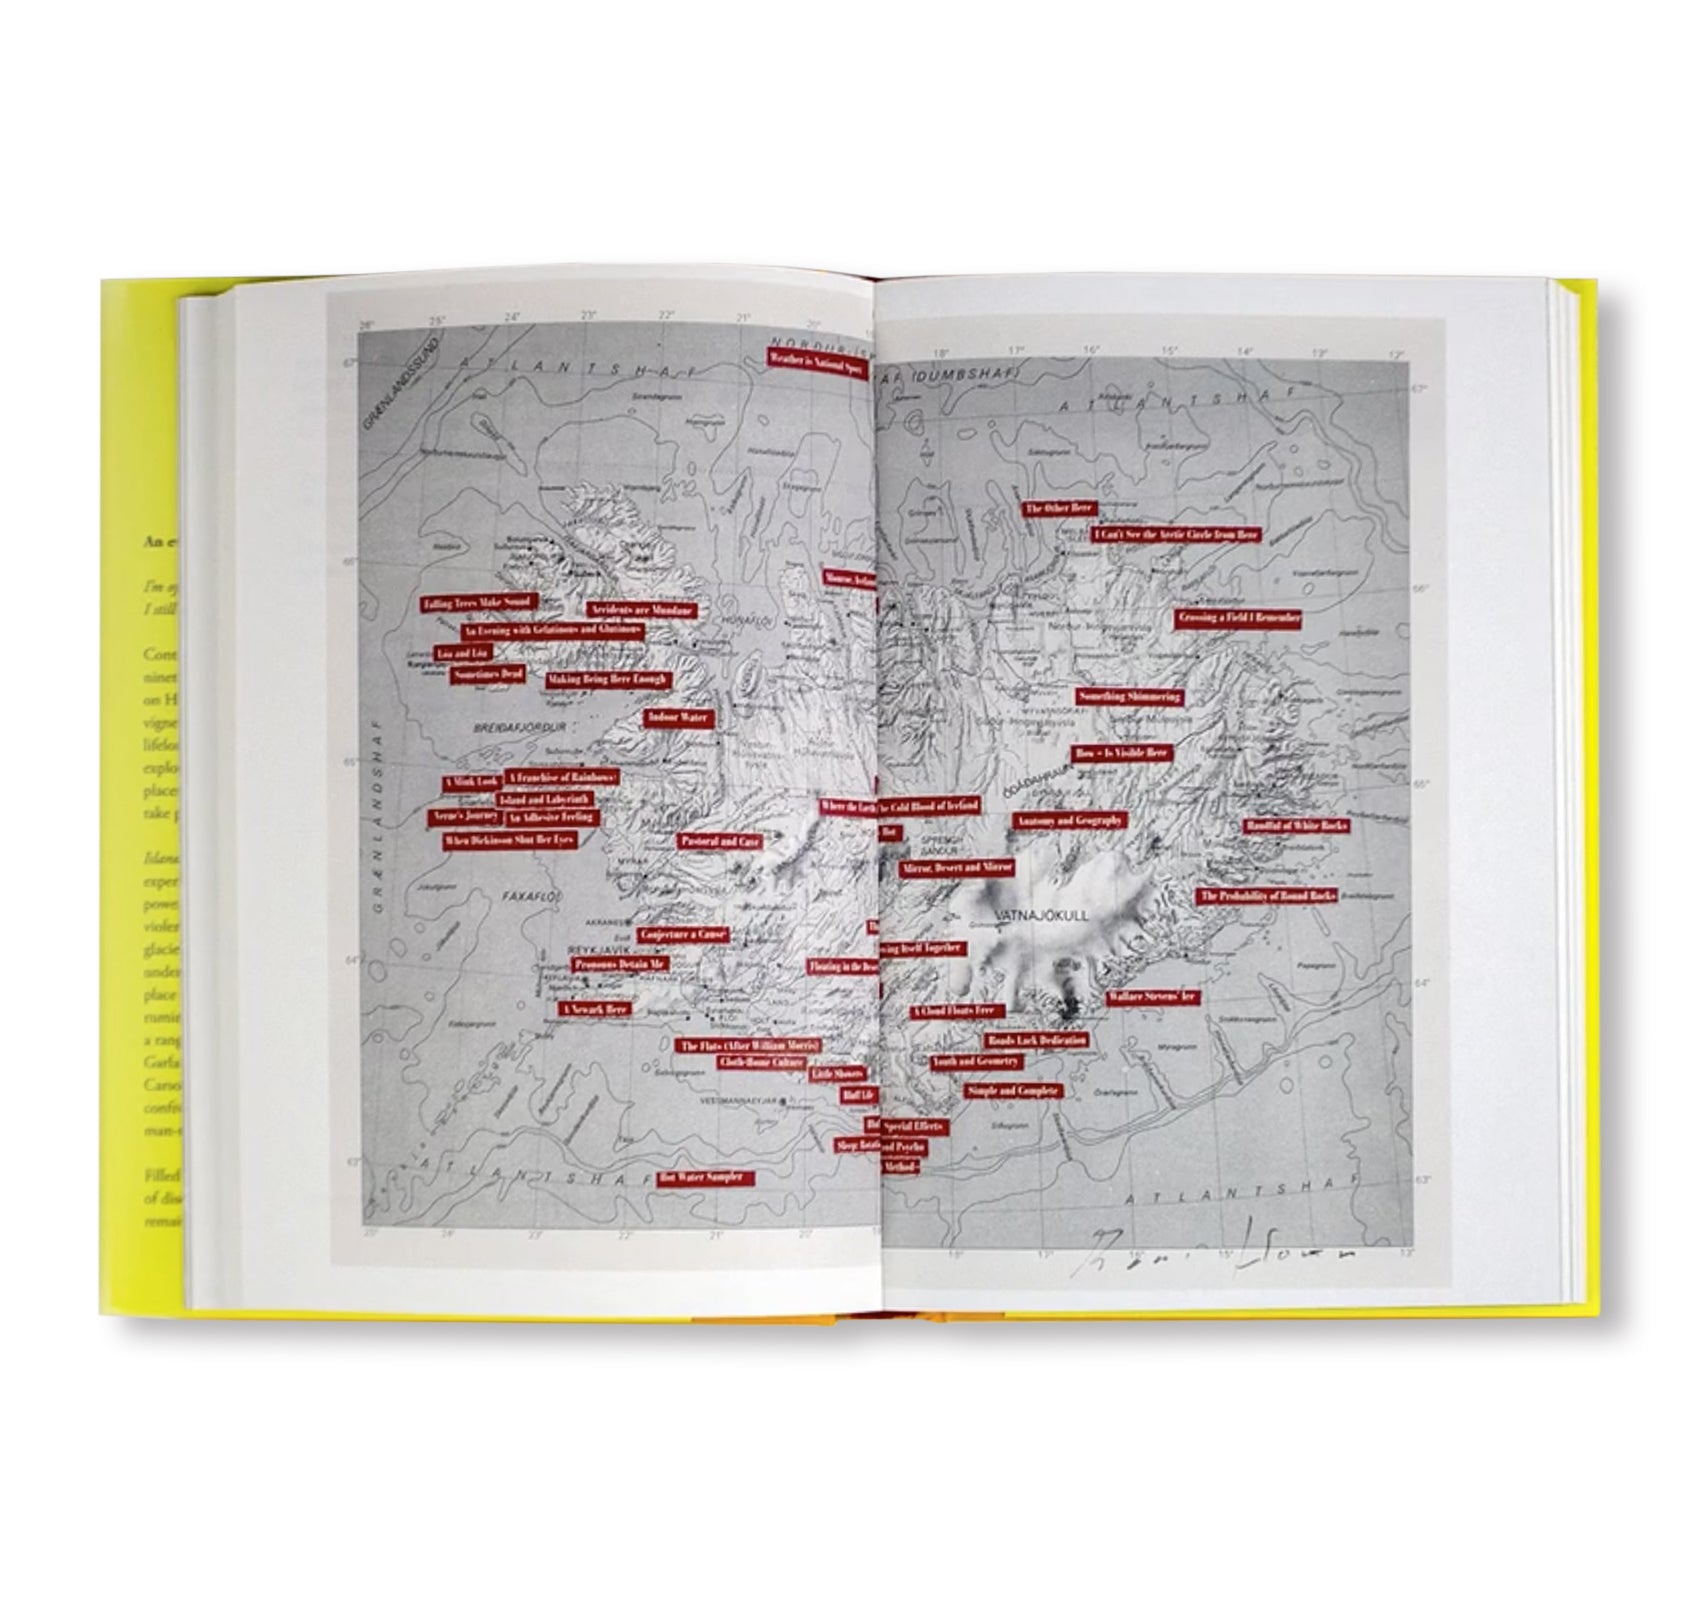 ISLAND ZOMBIE: ICELAND WRITINGS by Roni Horn